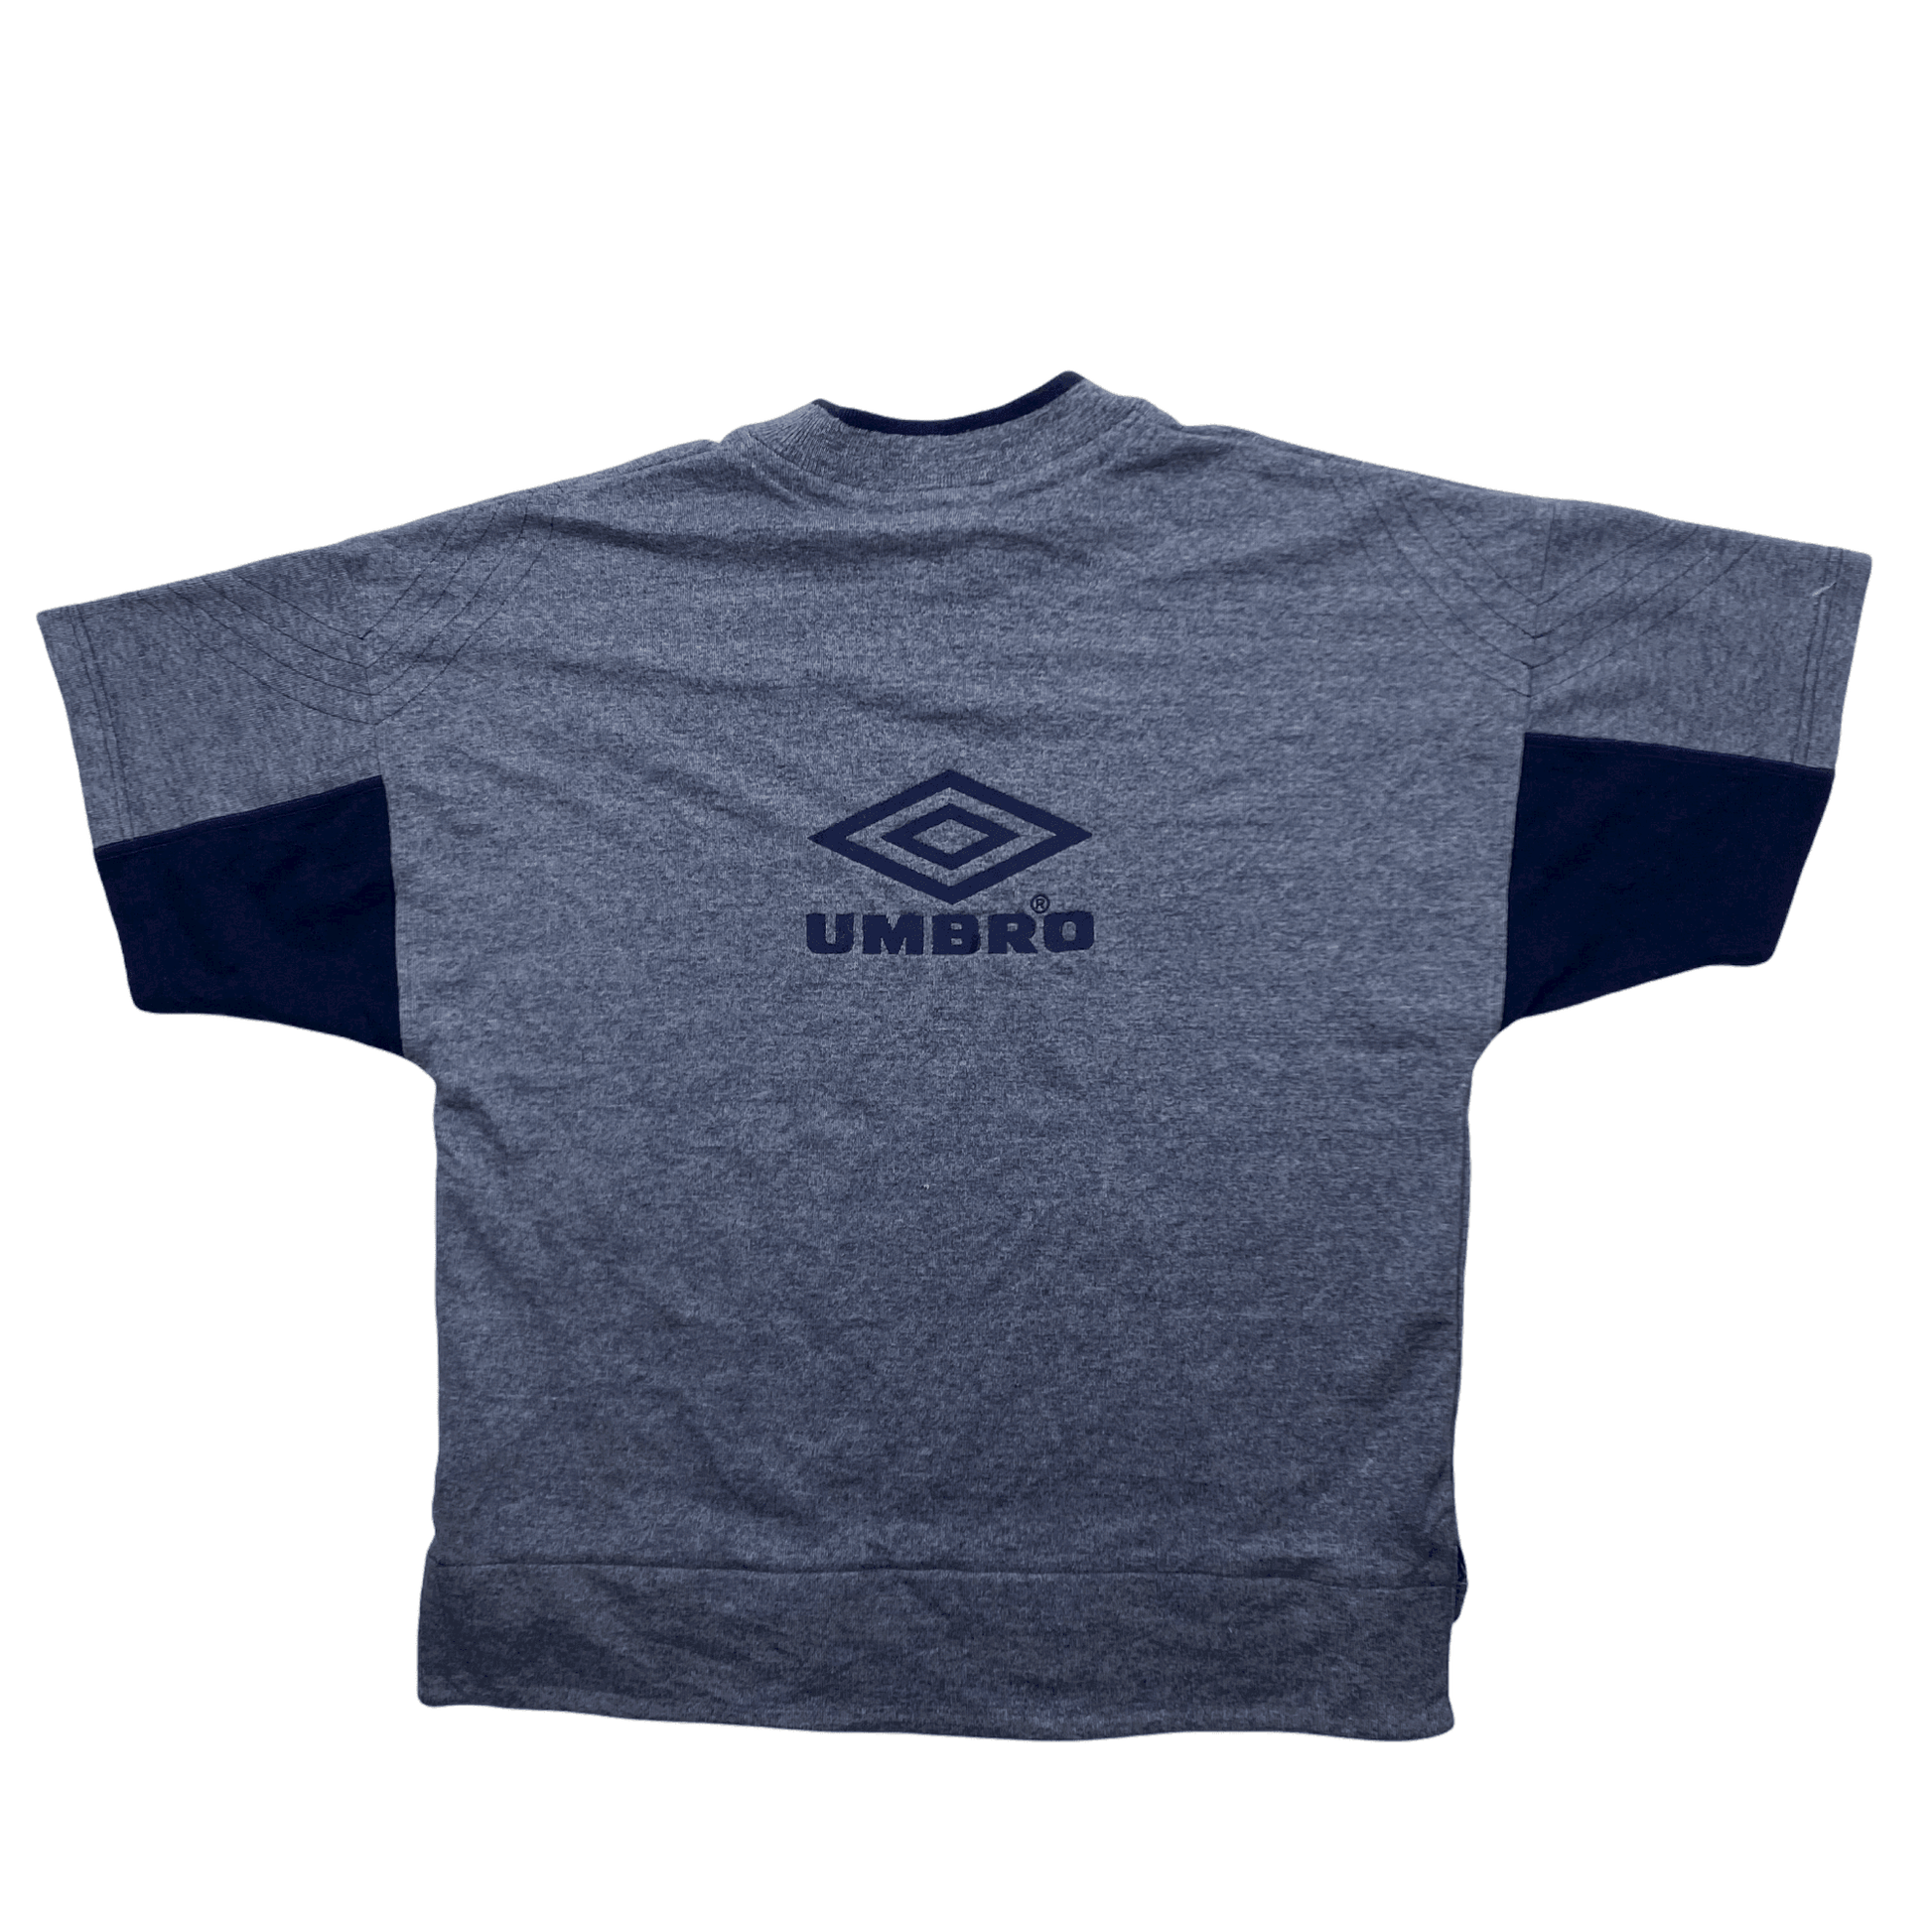 Vintage 90s Blue Umbro Spell-Out Heavy Tee - Large - The Streetwear Studio